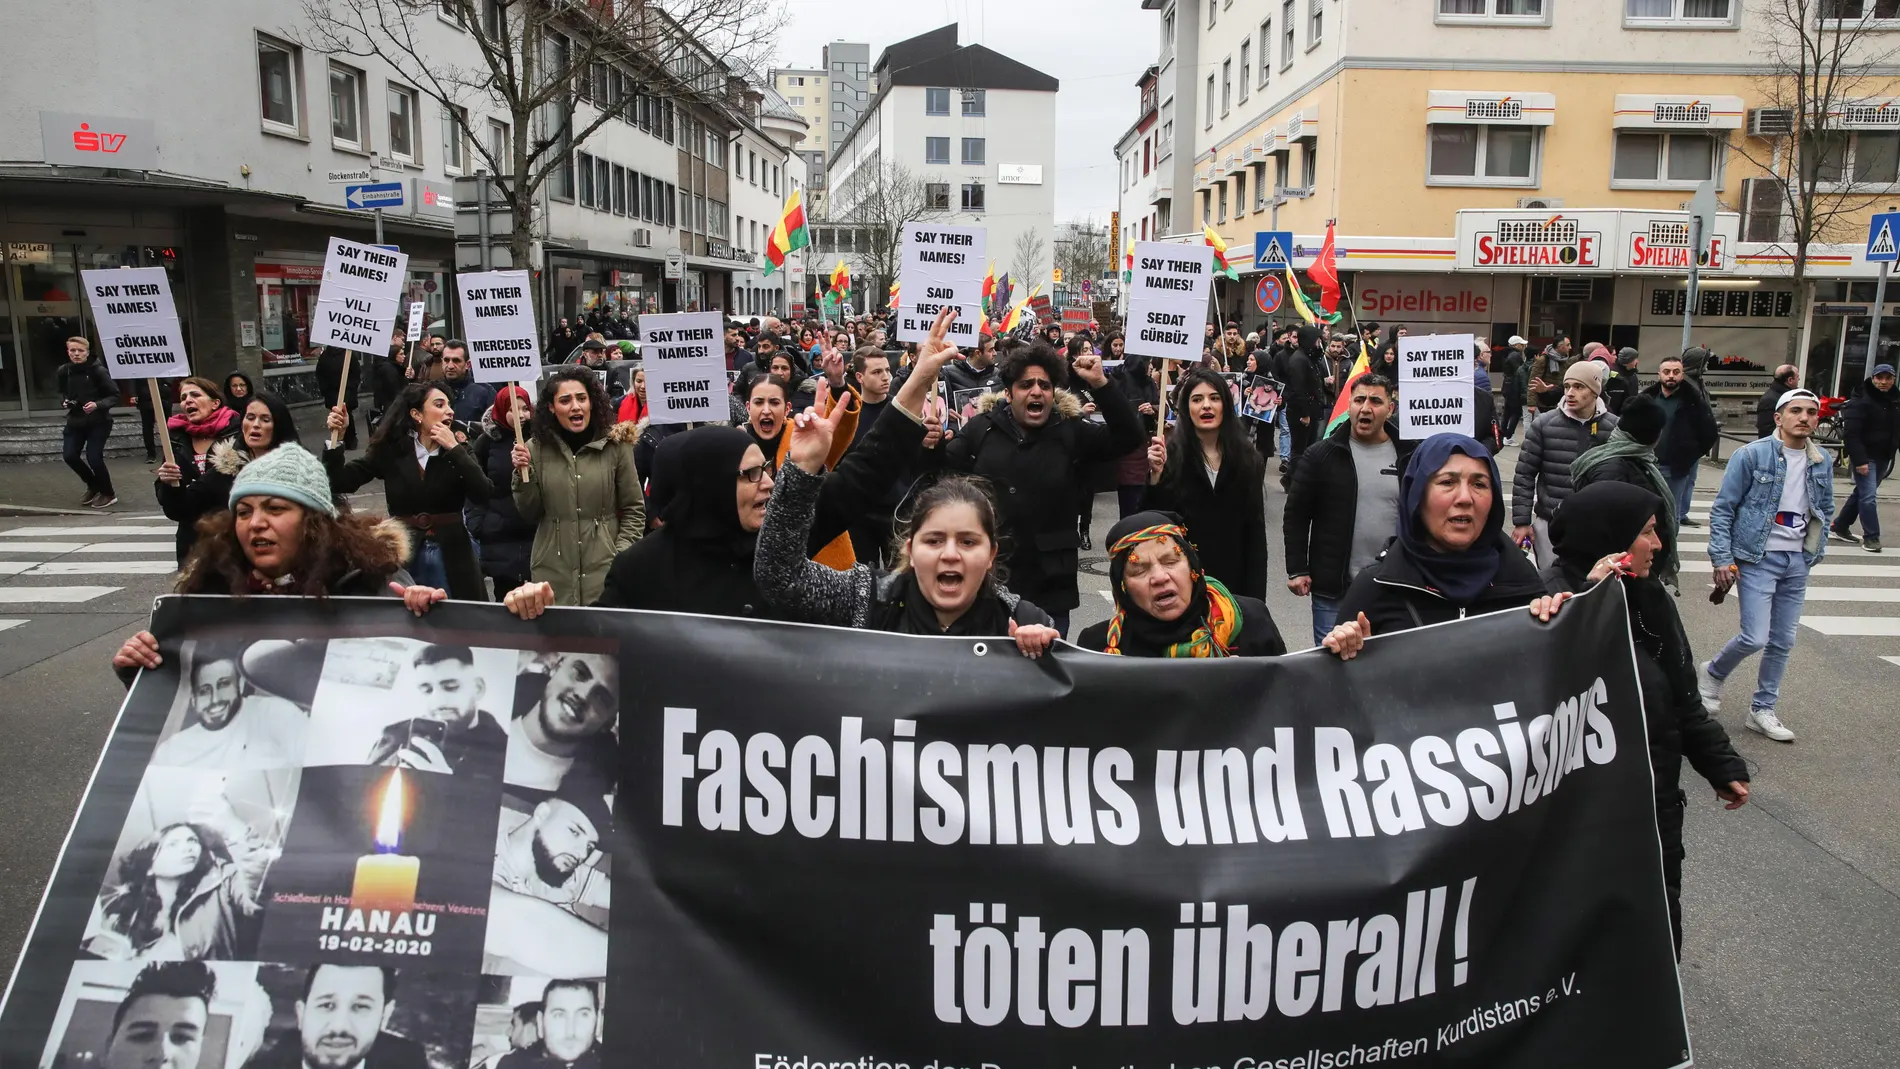 Protest against the racist terror attack in Hanau